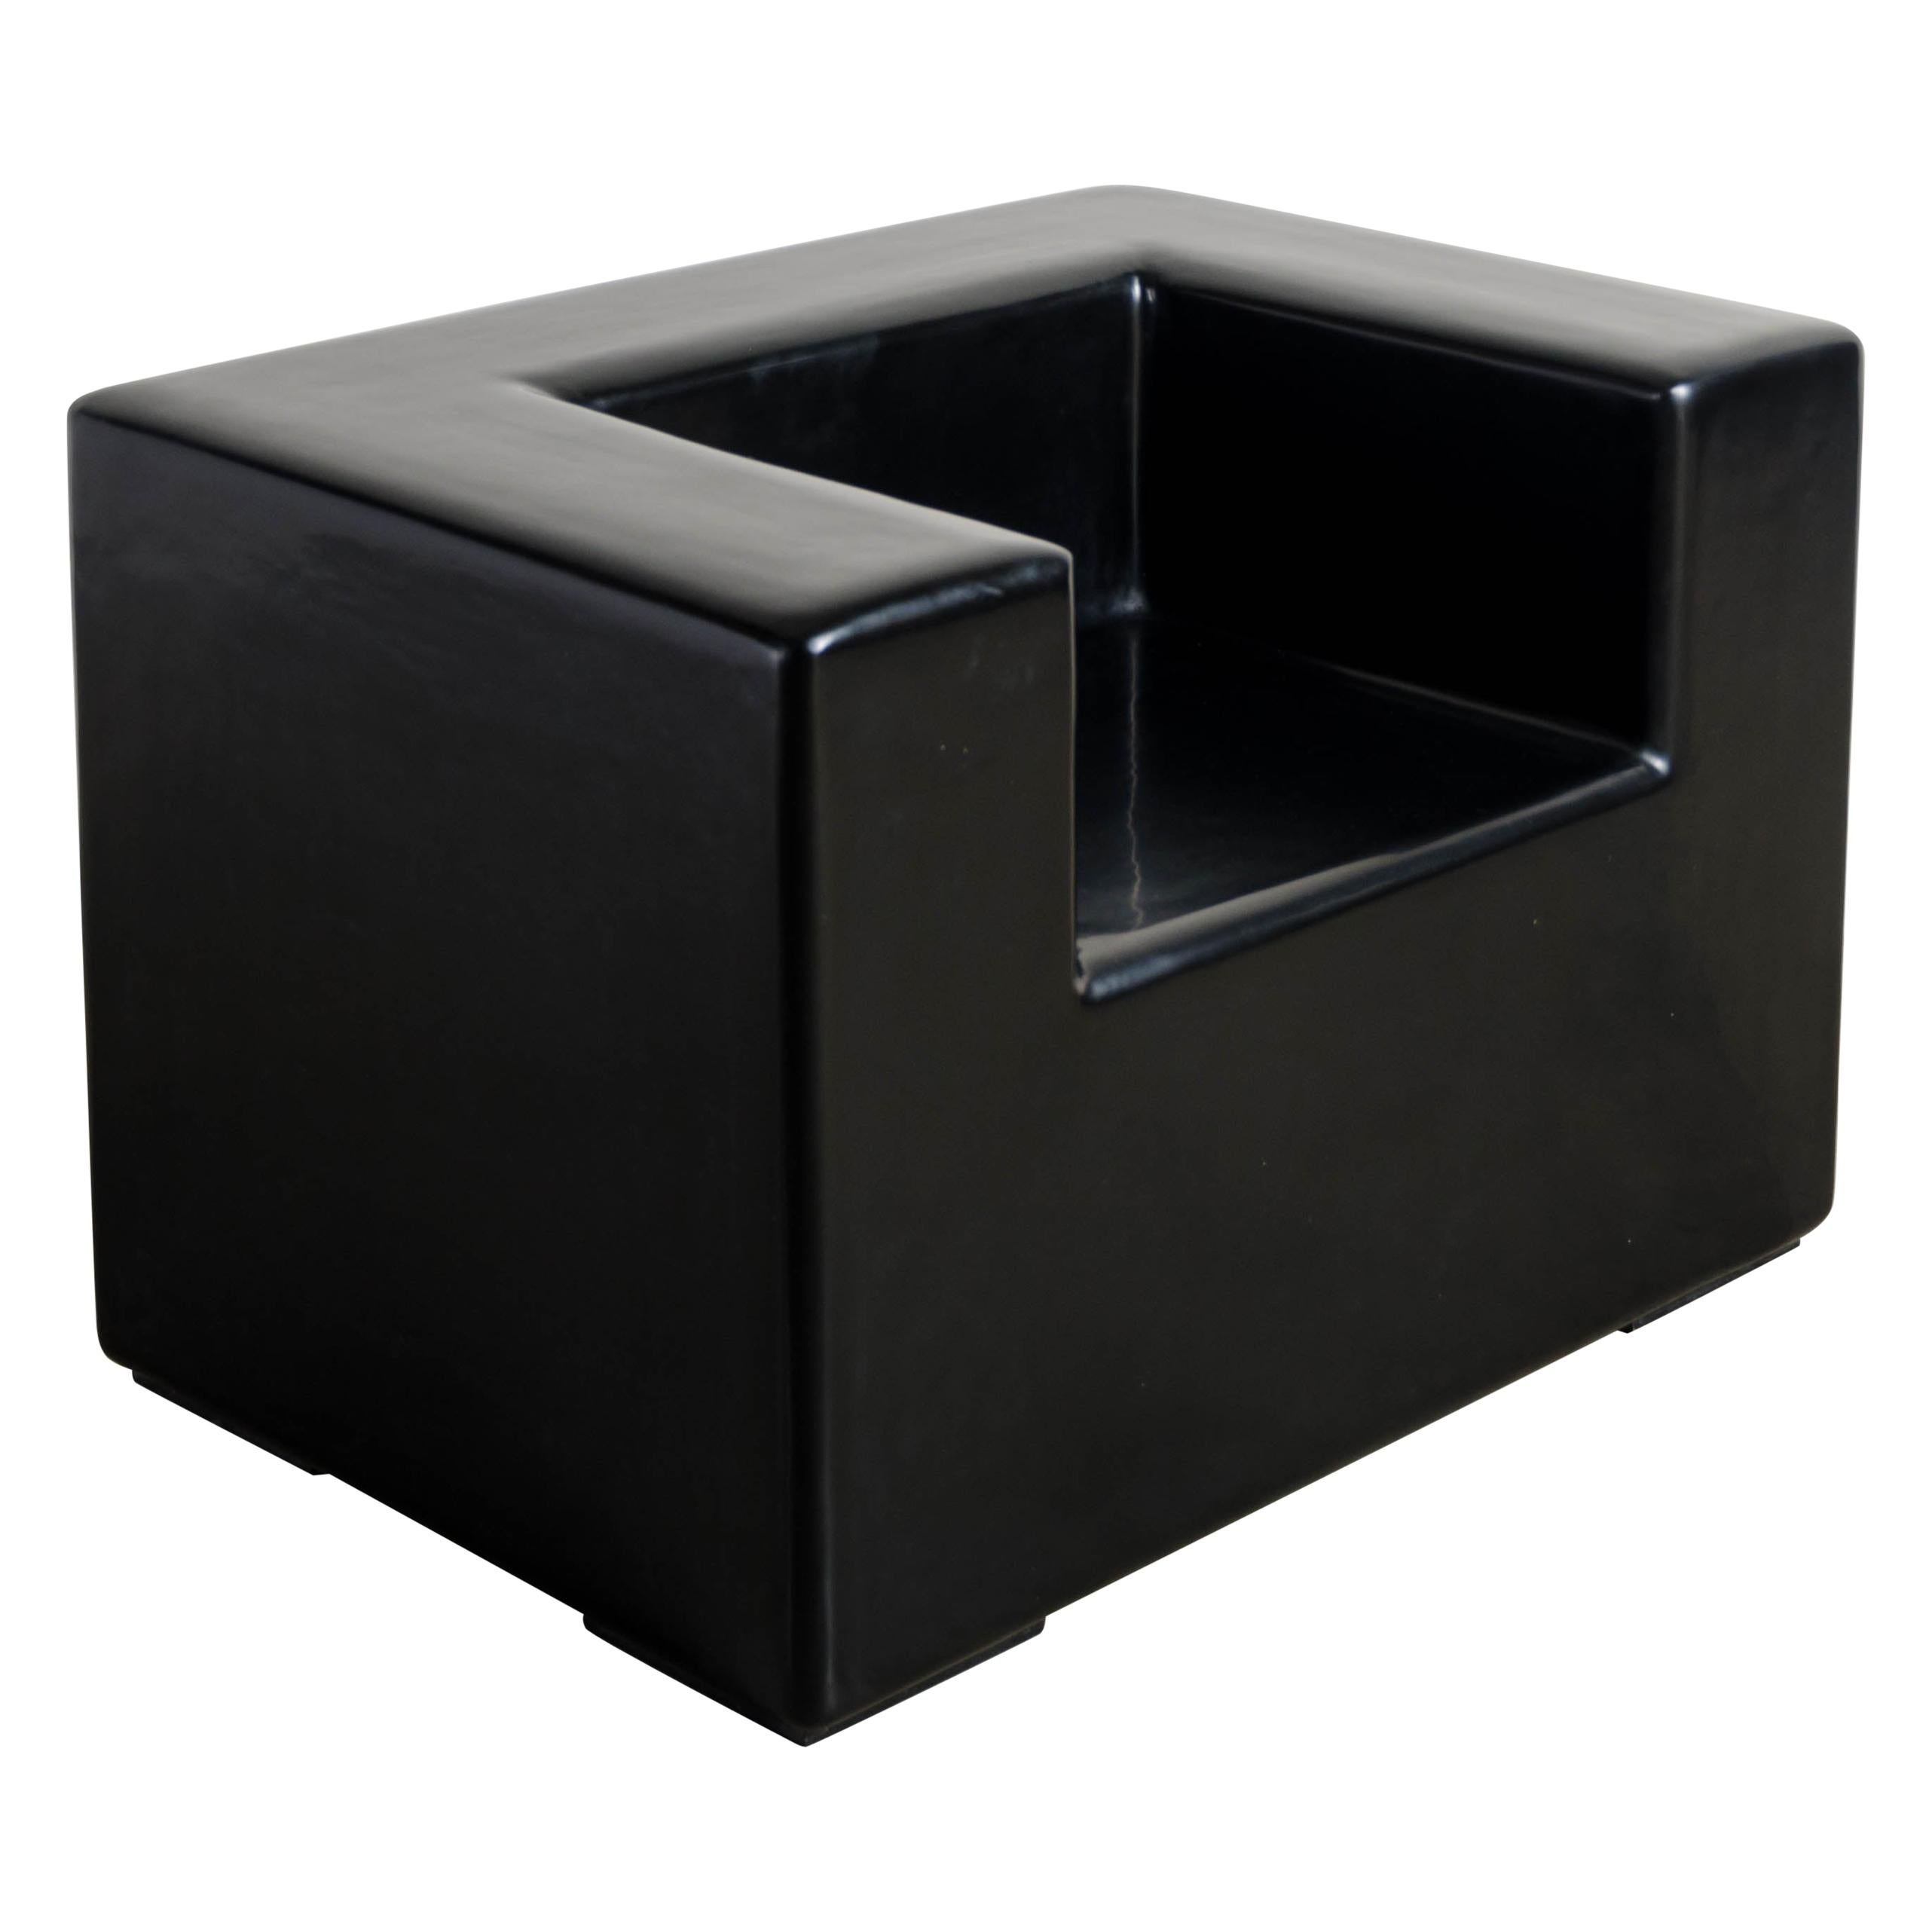 Arm Rest Chair, Black Lacquer by Robert Kuo, Handmade, Limited Edition